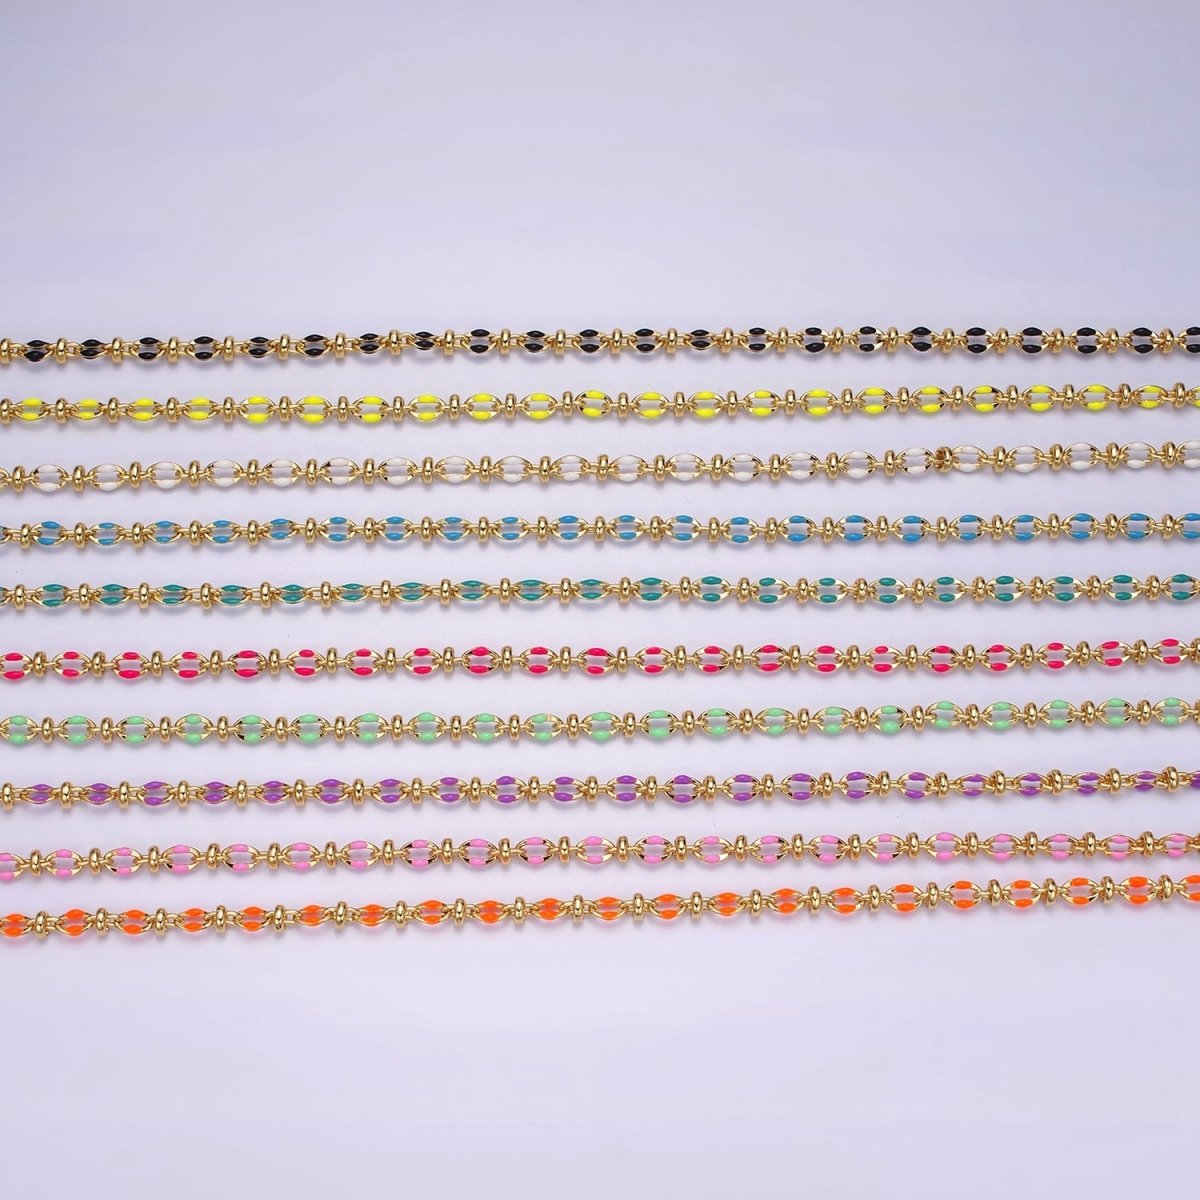 14K Gold Filled 3.8mm Multicolor Rainbow Enamel Crimp Double Link Unfinished Chain For Jewelry Making | ROLL-1394 1395 1396 1397 1398 1399 1400 1401 1402 1403 Clearance Pricing - DLUXCA